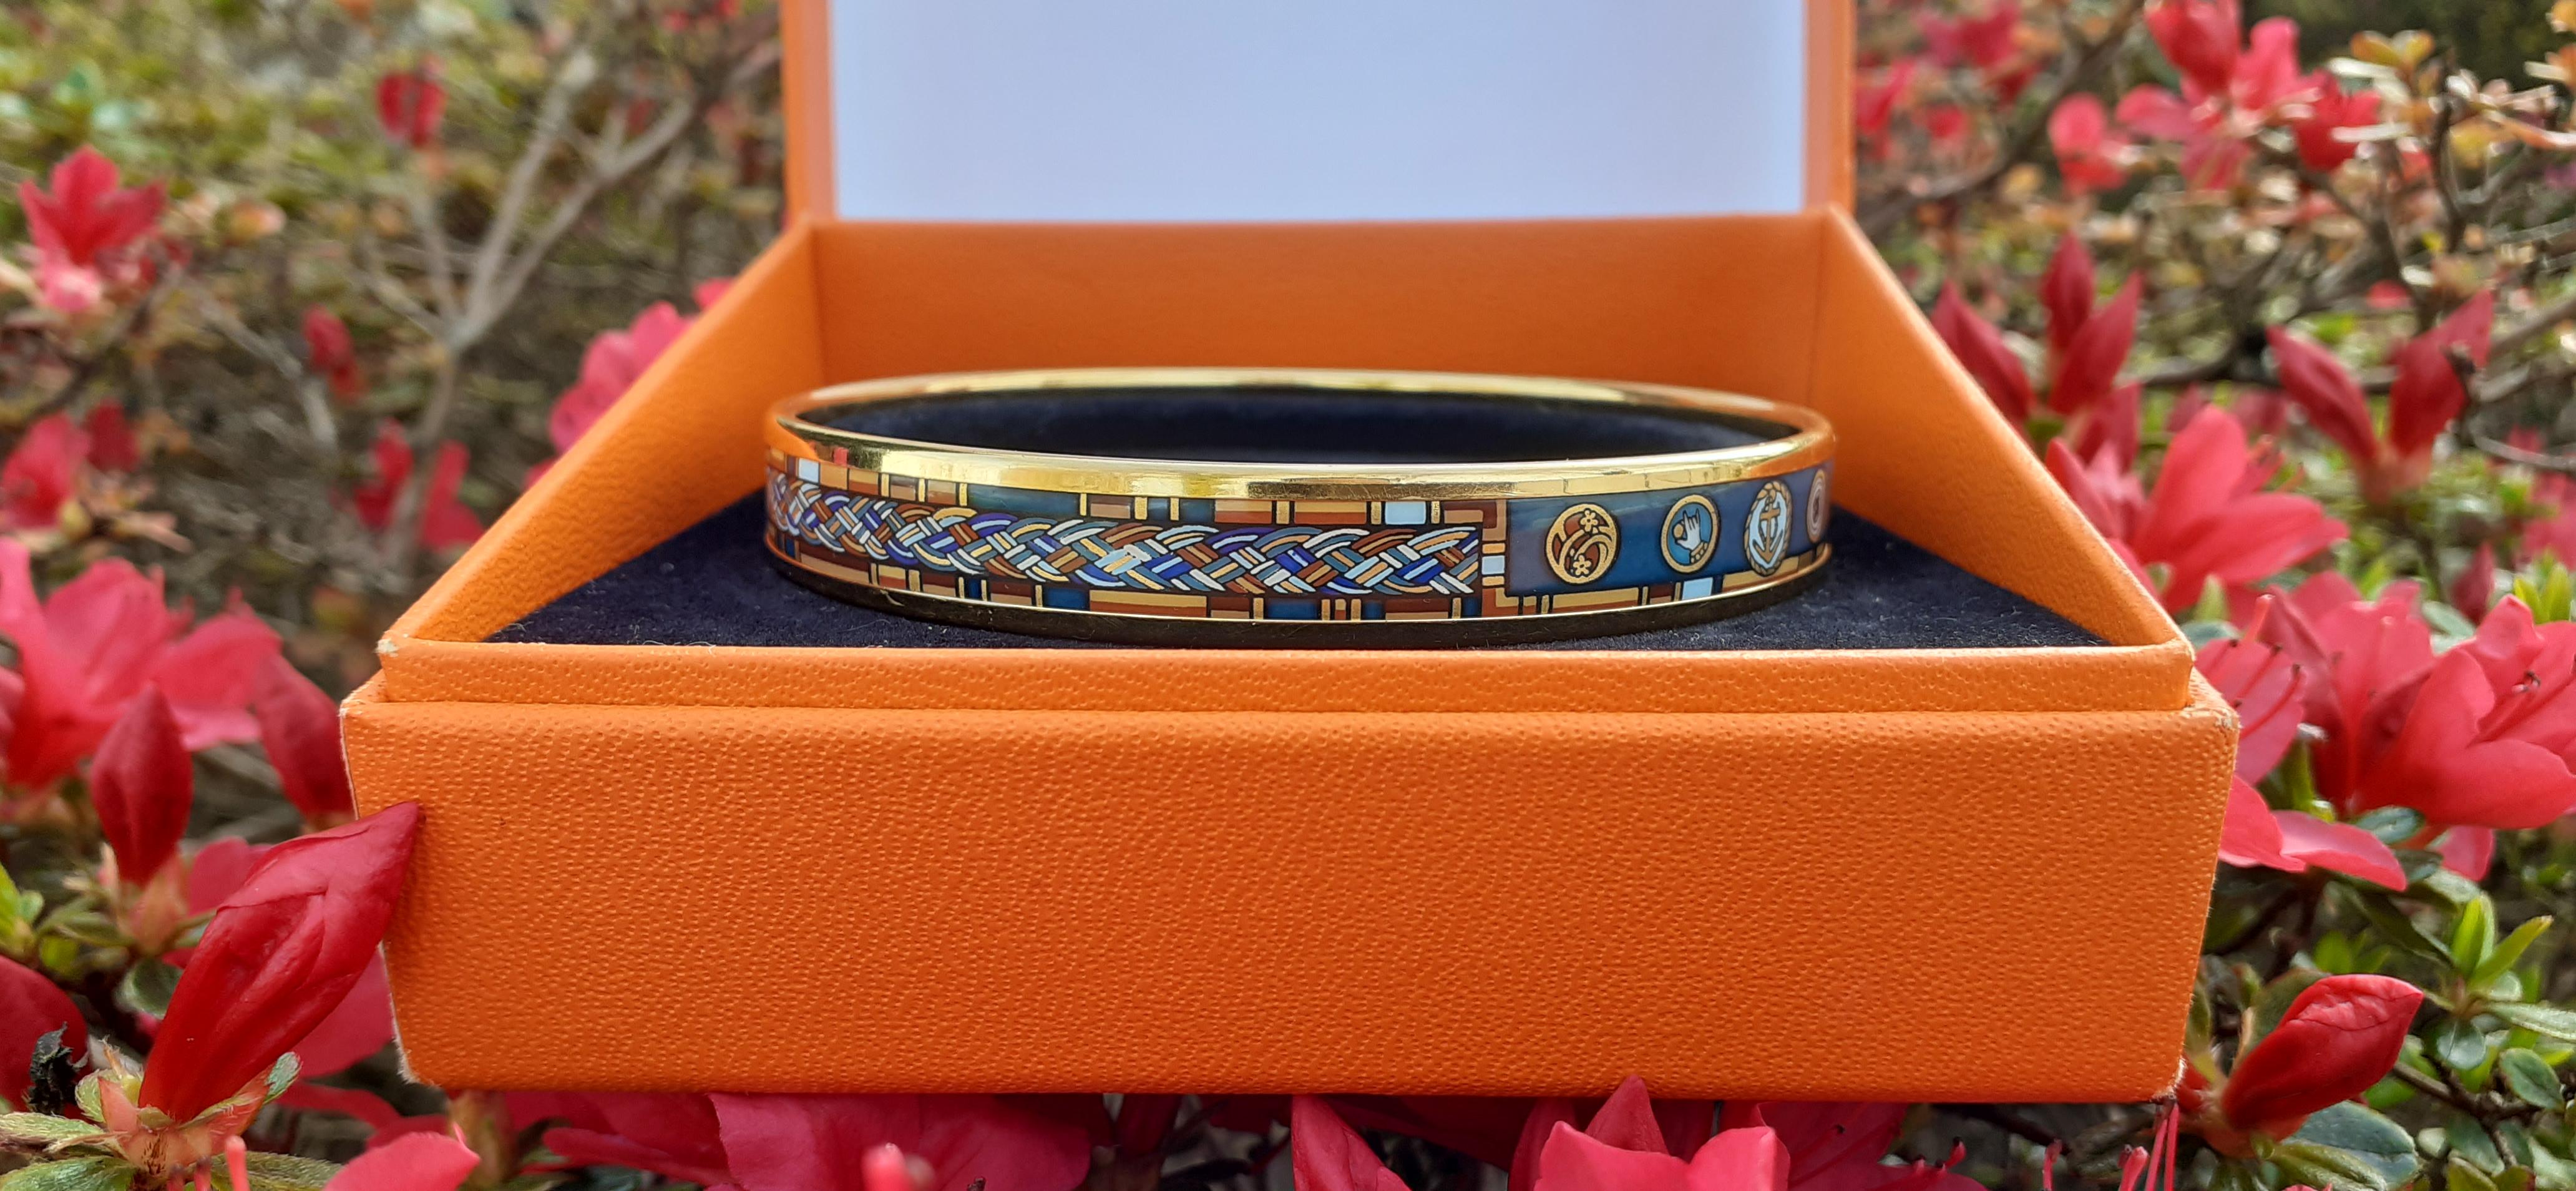 Lovely Authentic Hermès Bracelet

Print: from the 